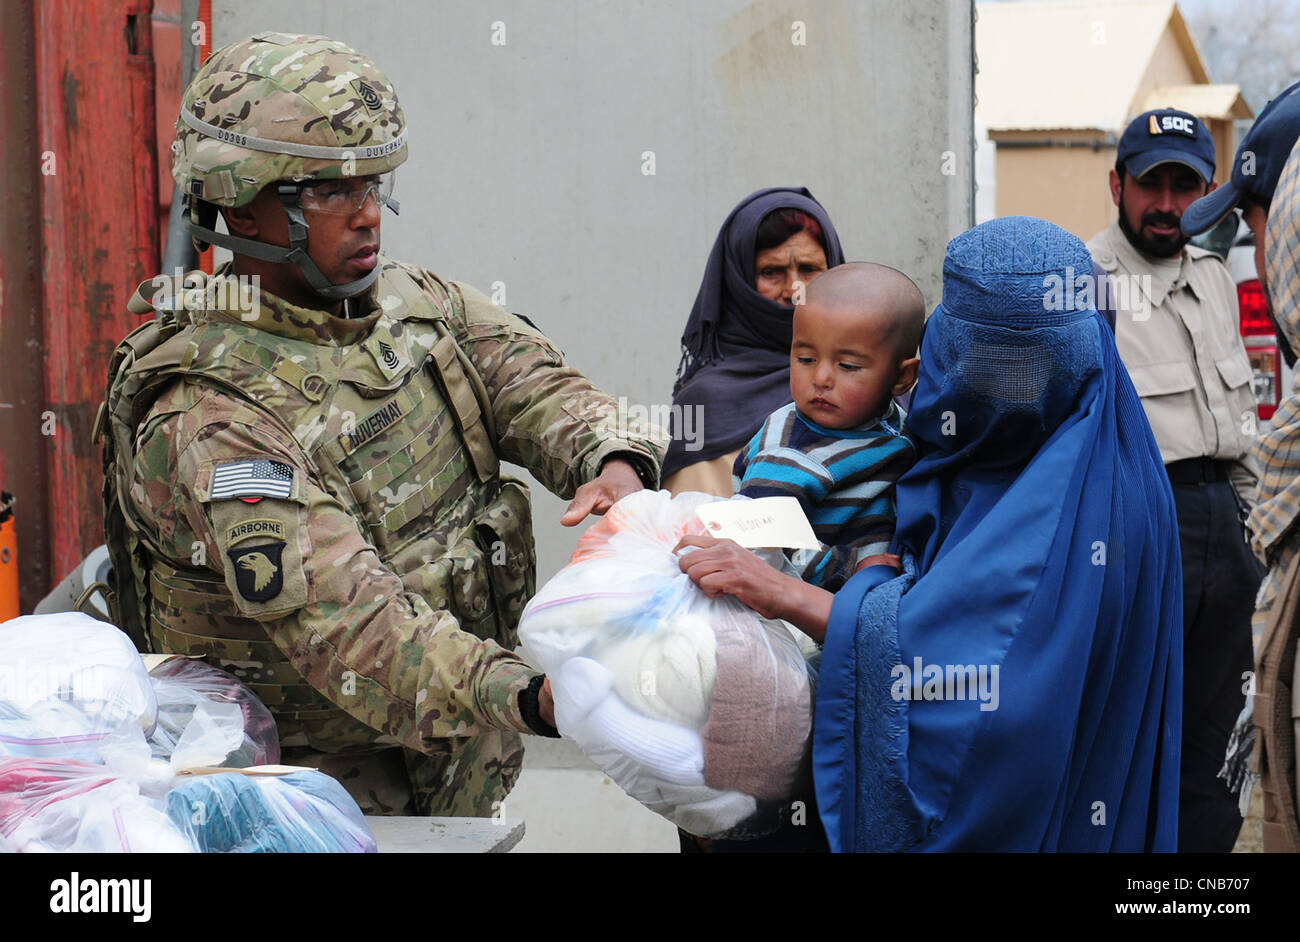 US Army soldier Herbert Duvernay hands out clothing to an Afghan woman wearing a full body burqa at El Salam Egyptian hospial Stock Photo